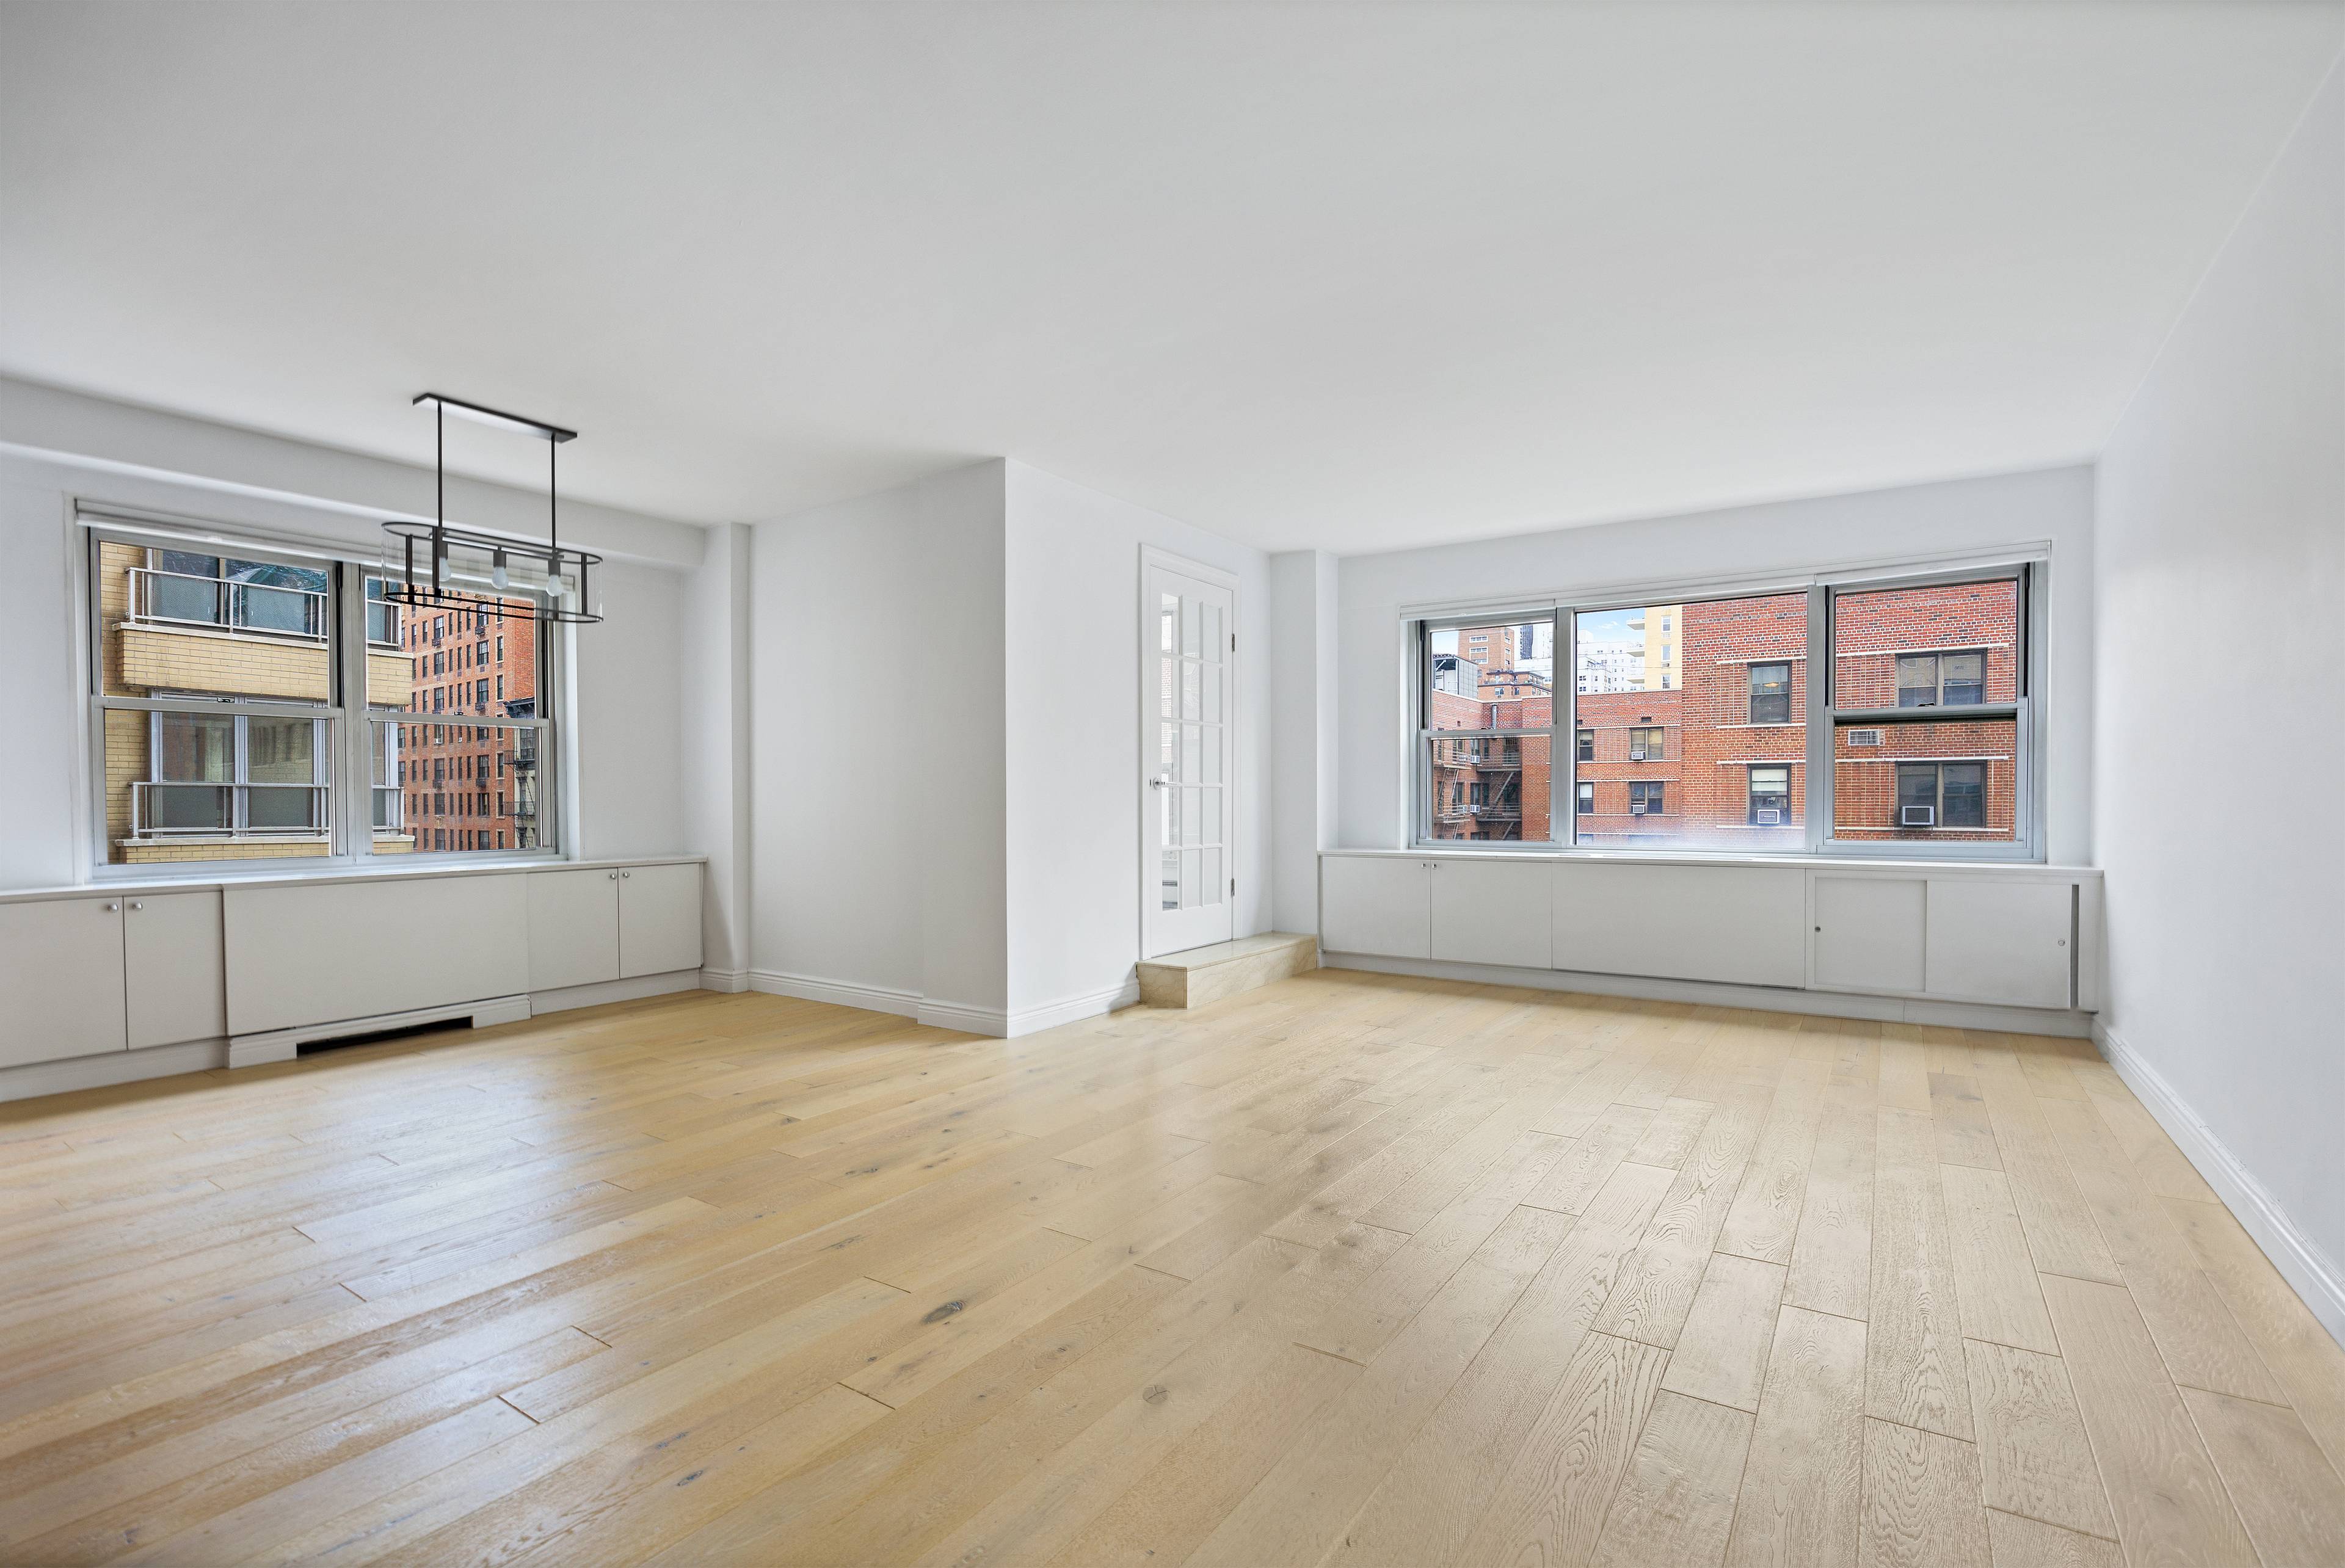 Fantastic sun drenched grand scale 1 bedroom, 1 bathroom home convertible to 2 beds 2 full bathrooms located in Greenwich Village's coveted Brevoort East.